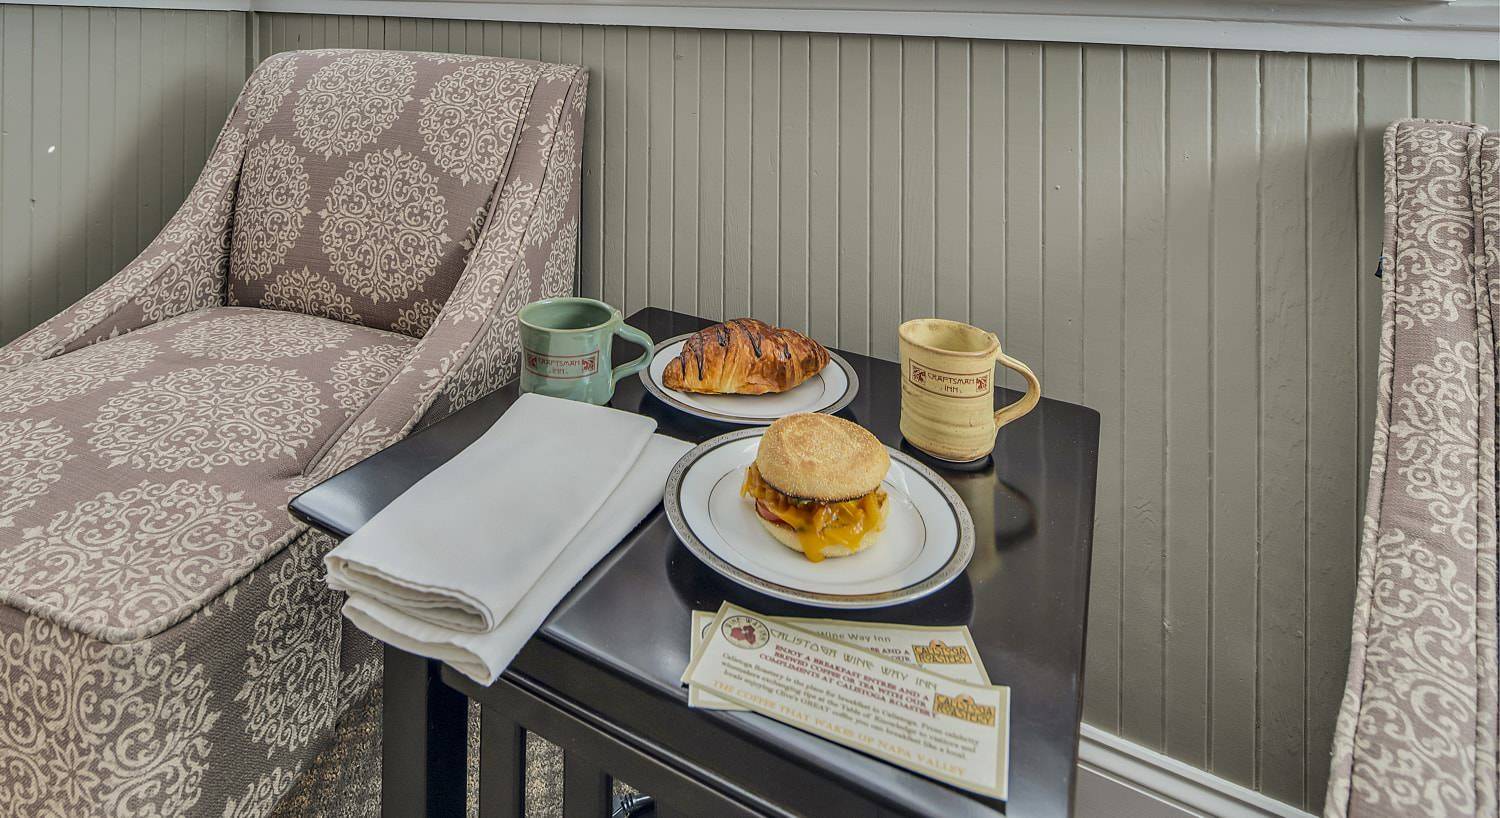 Brown side table with one white plate with a breakfast sandwich and another white plate with a chocolate croissant